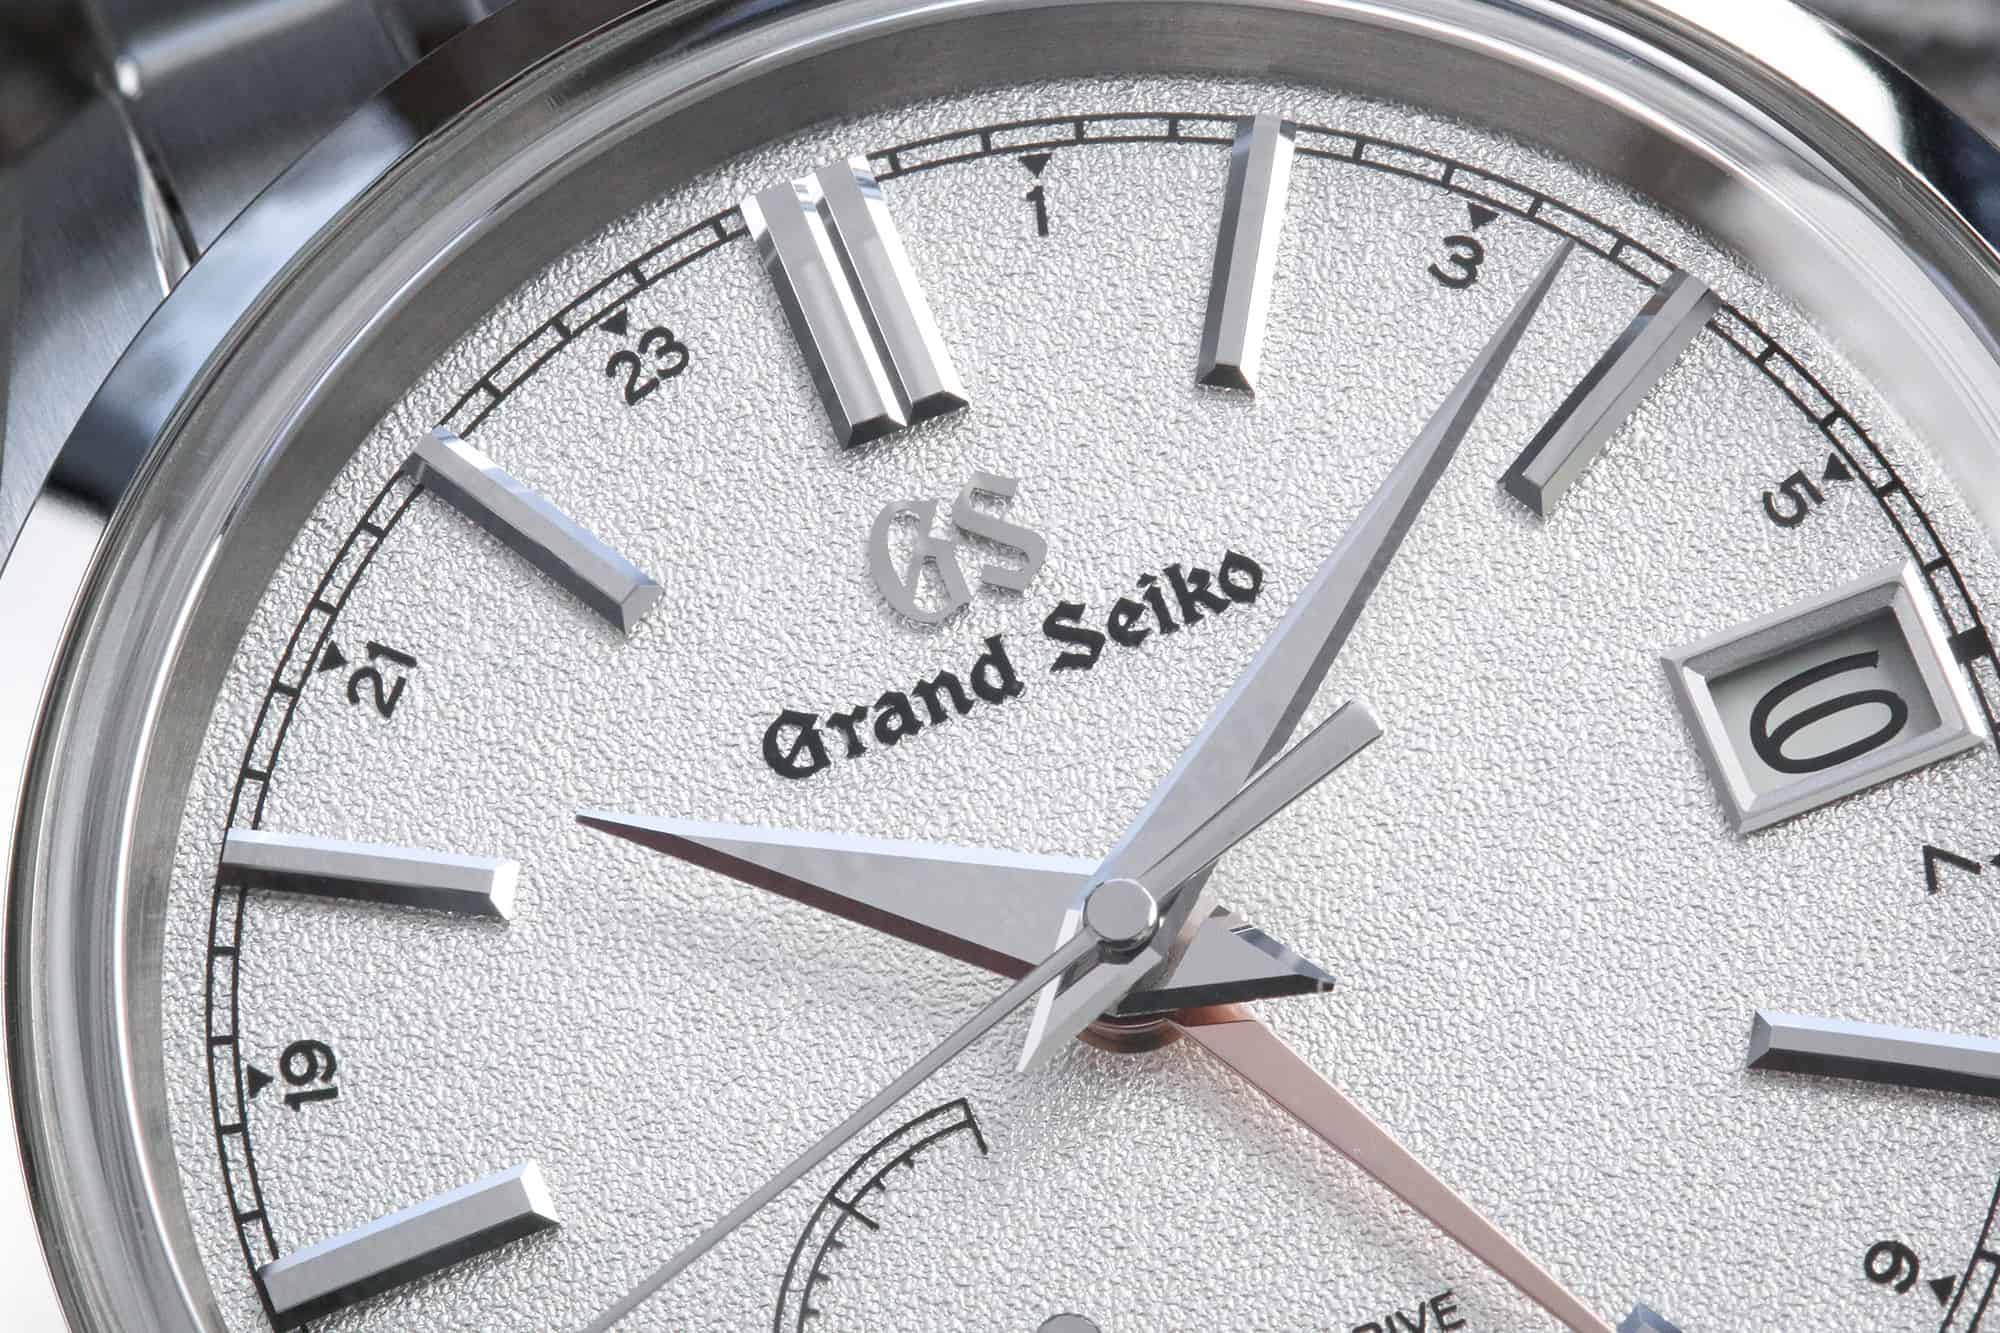 Worn & Wound - Grand Seiko Introduces a New Series of GMT Watches Based on  the Changi